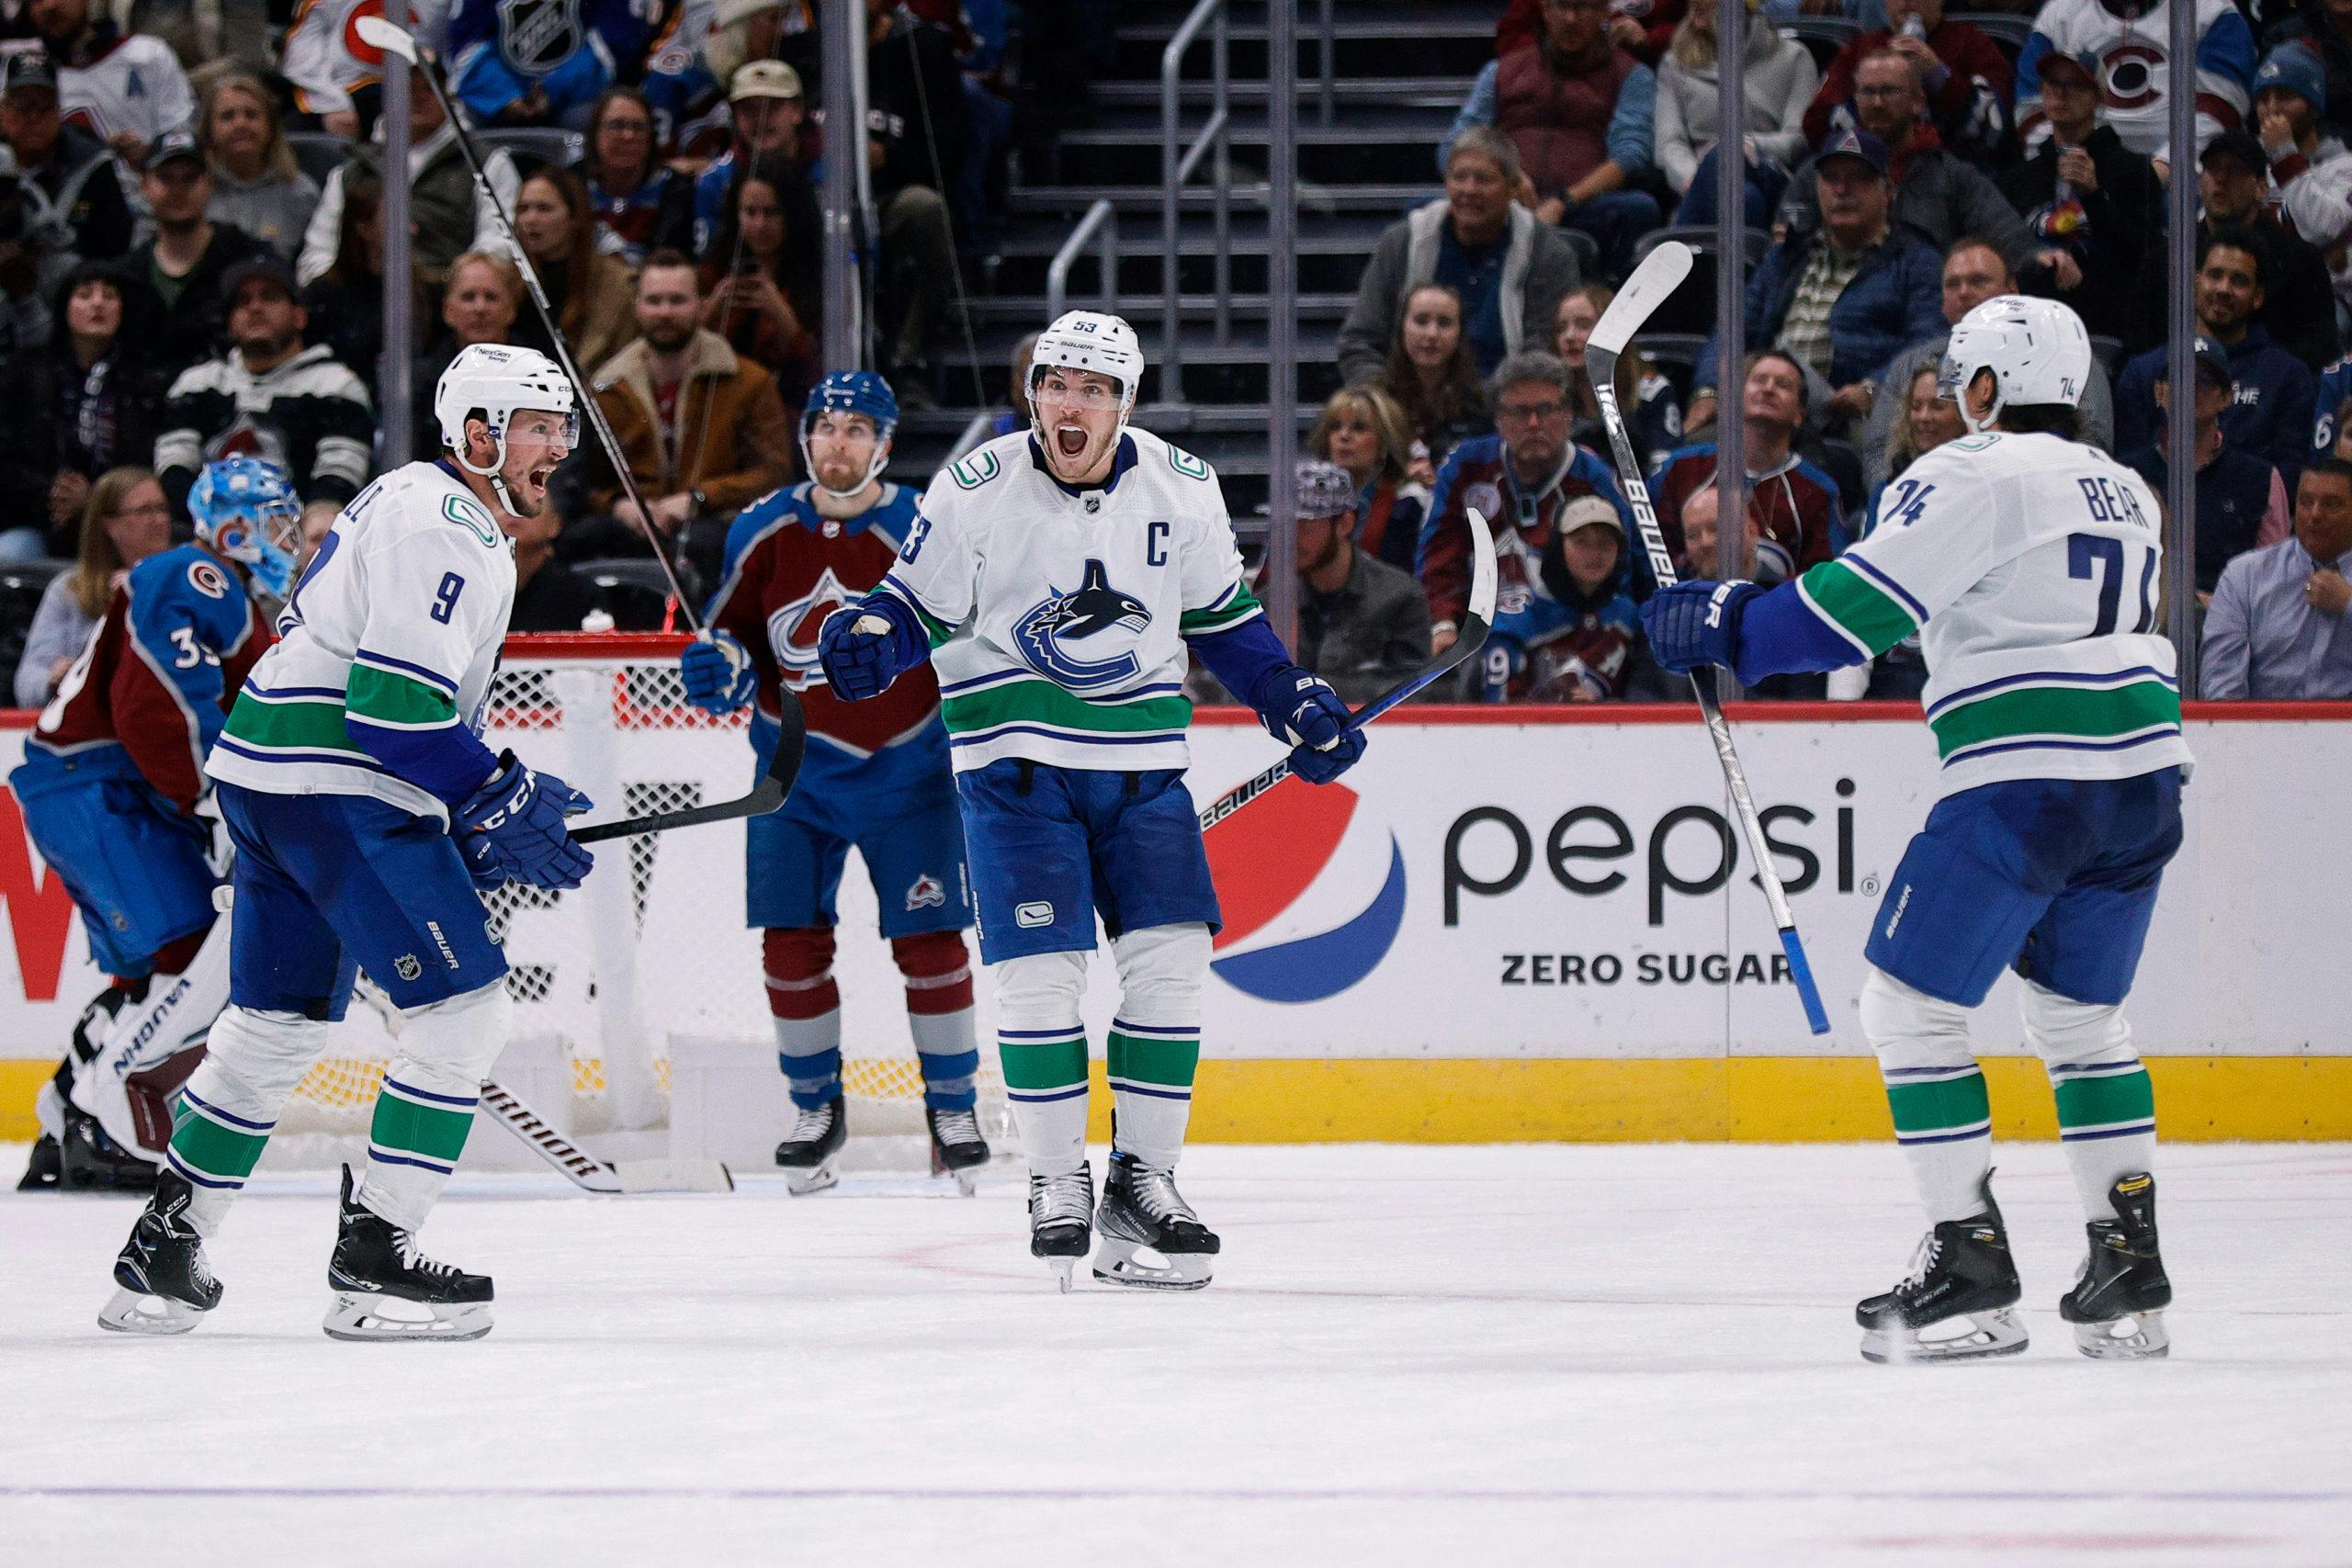 The Stanchies: Bogilny scores again, and Elias Pettersson continues to do  it all for the Canucks - CanucksArmy